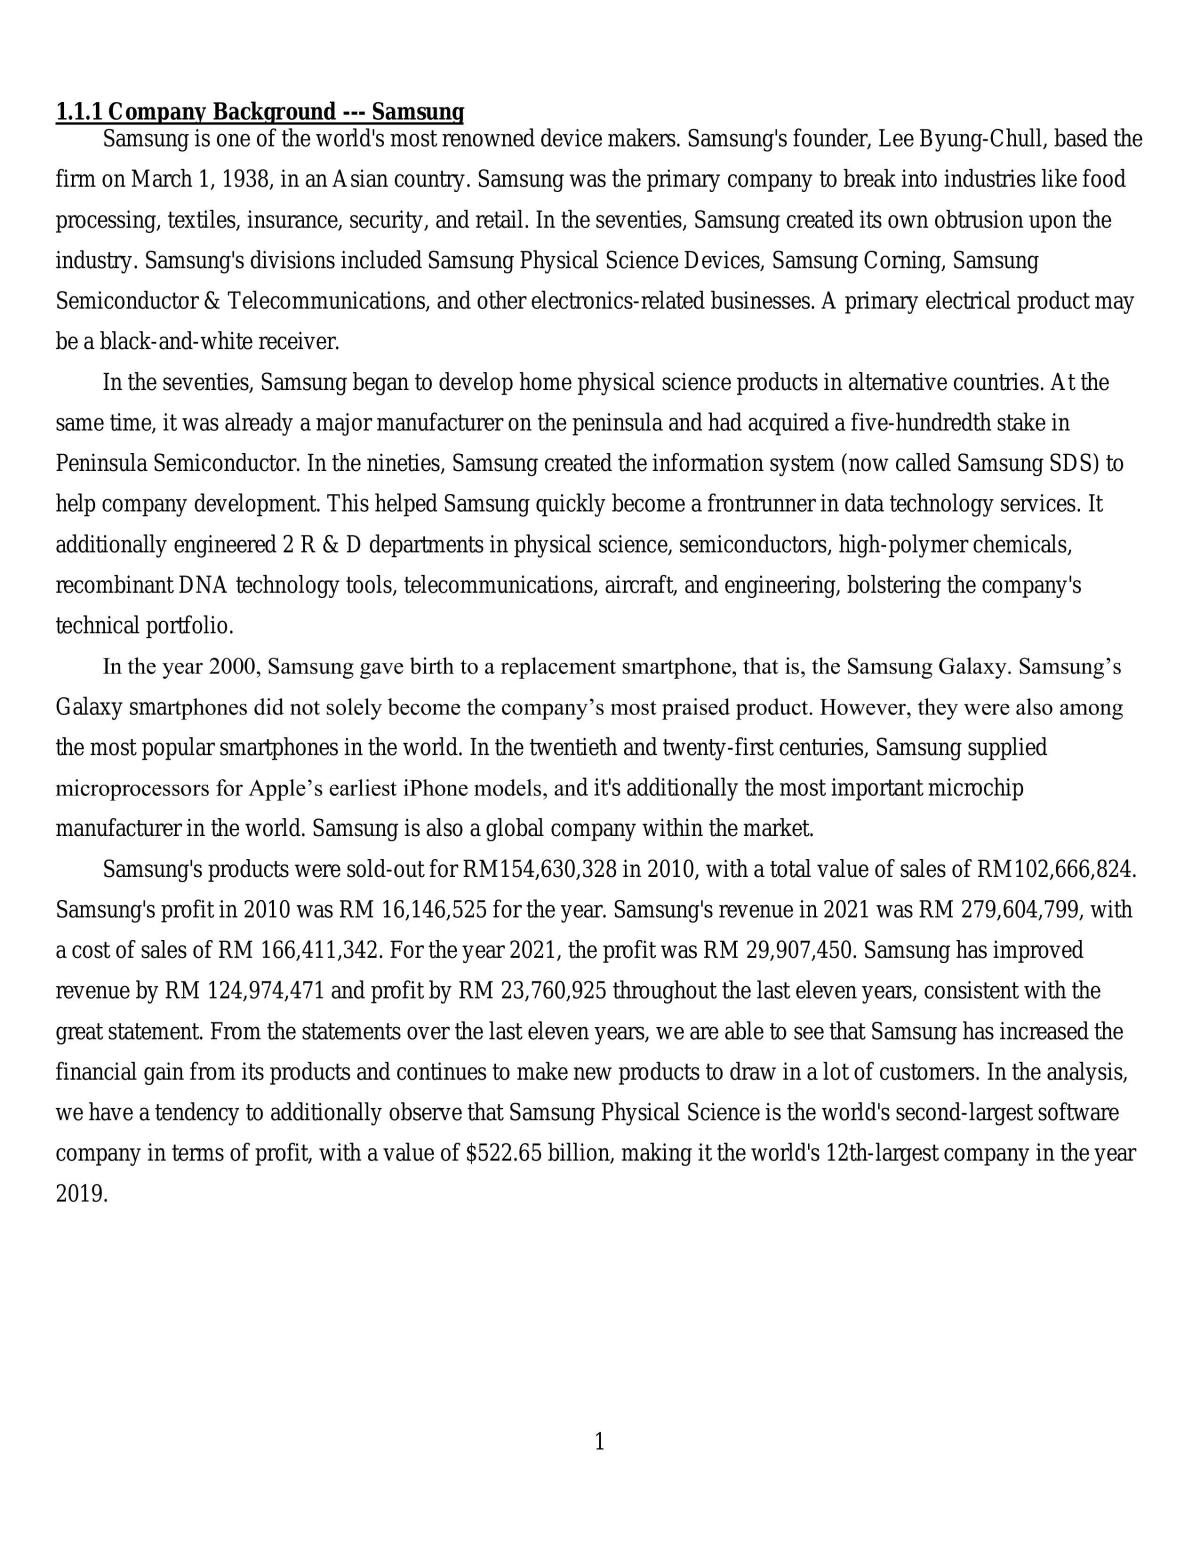 Samsung Report - Page 2